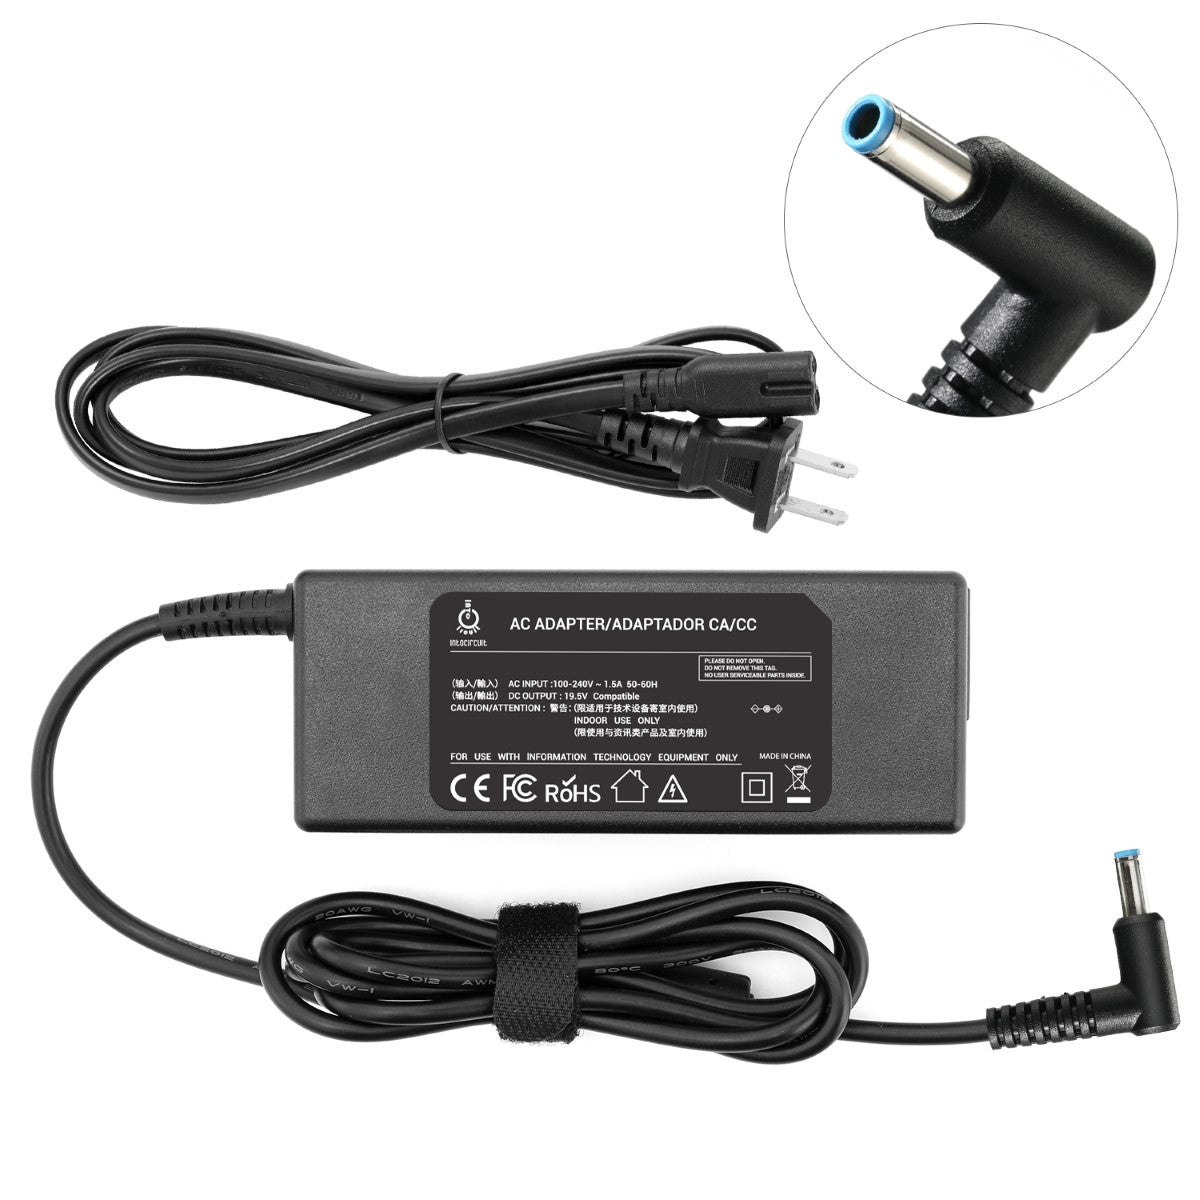 Charger for HP Chromebook 11 G3 Laptop